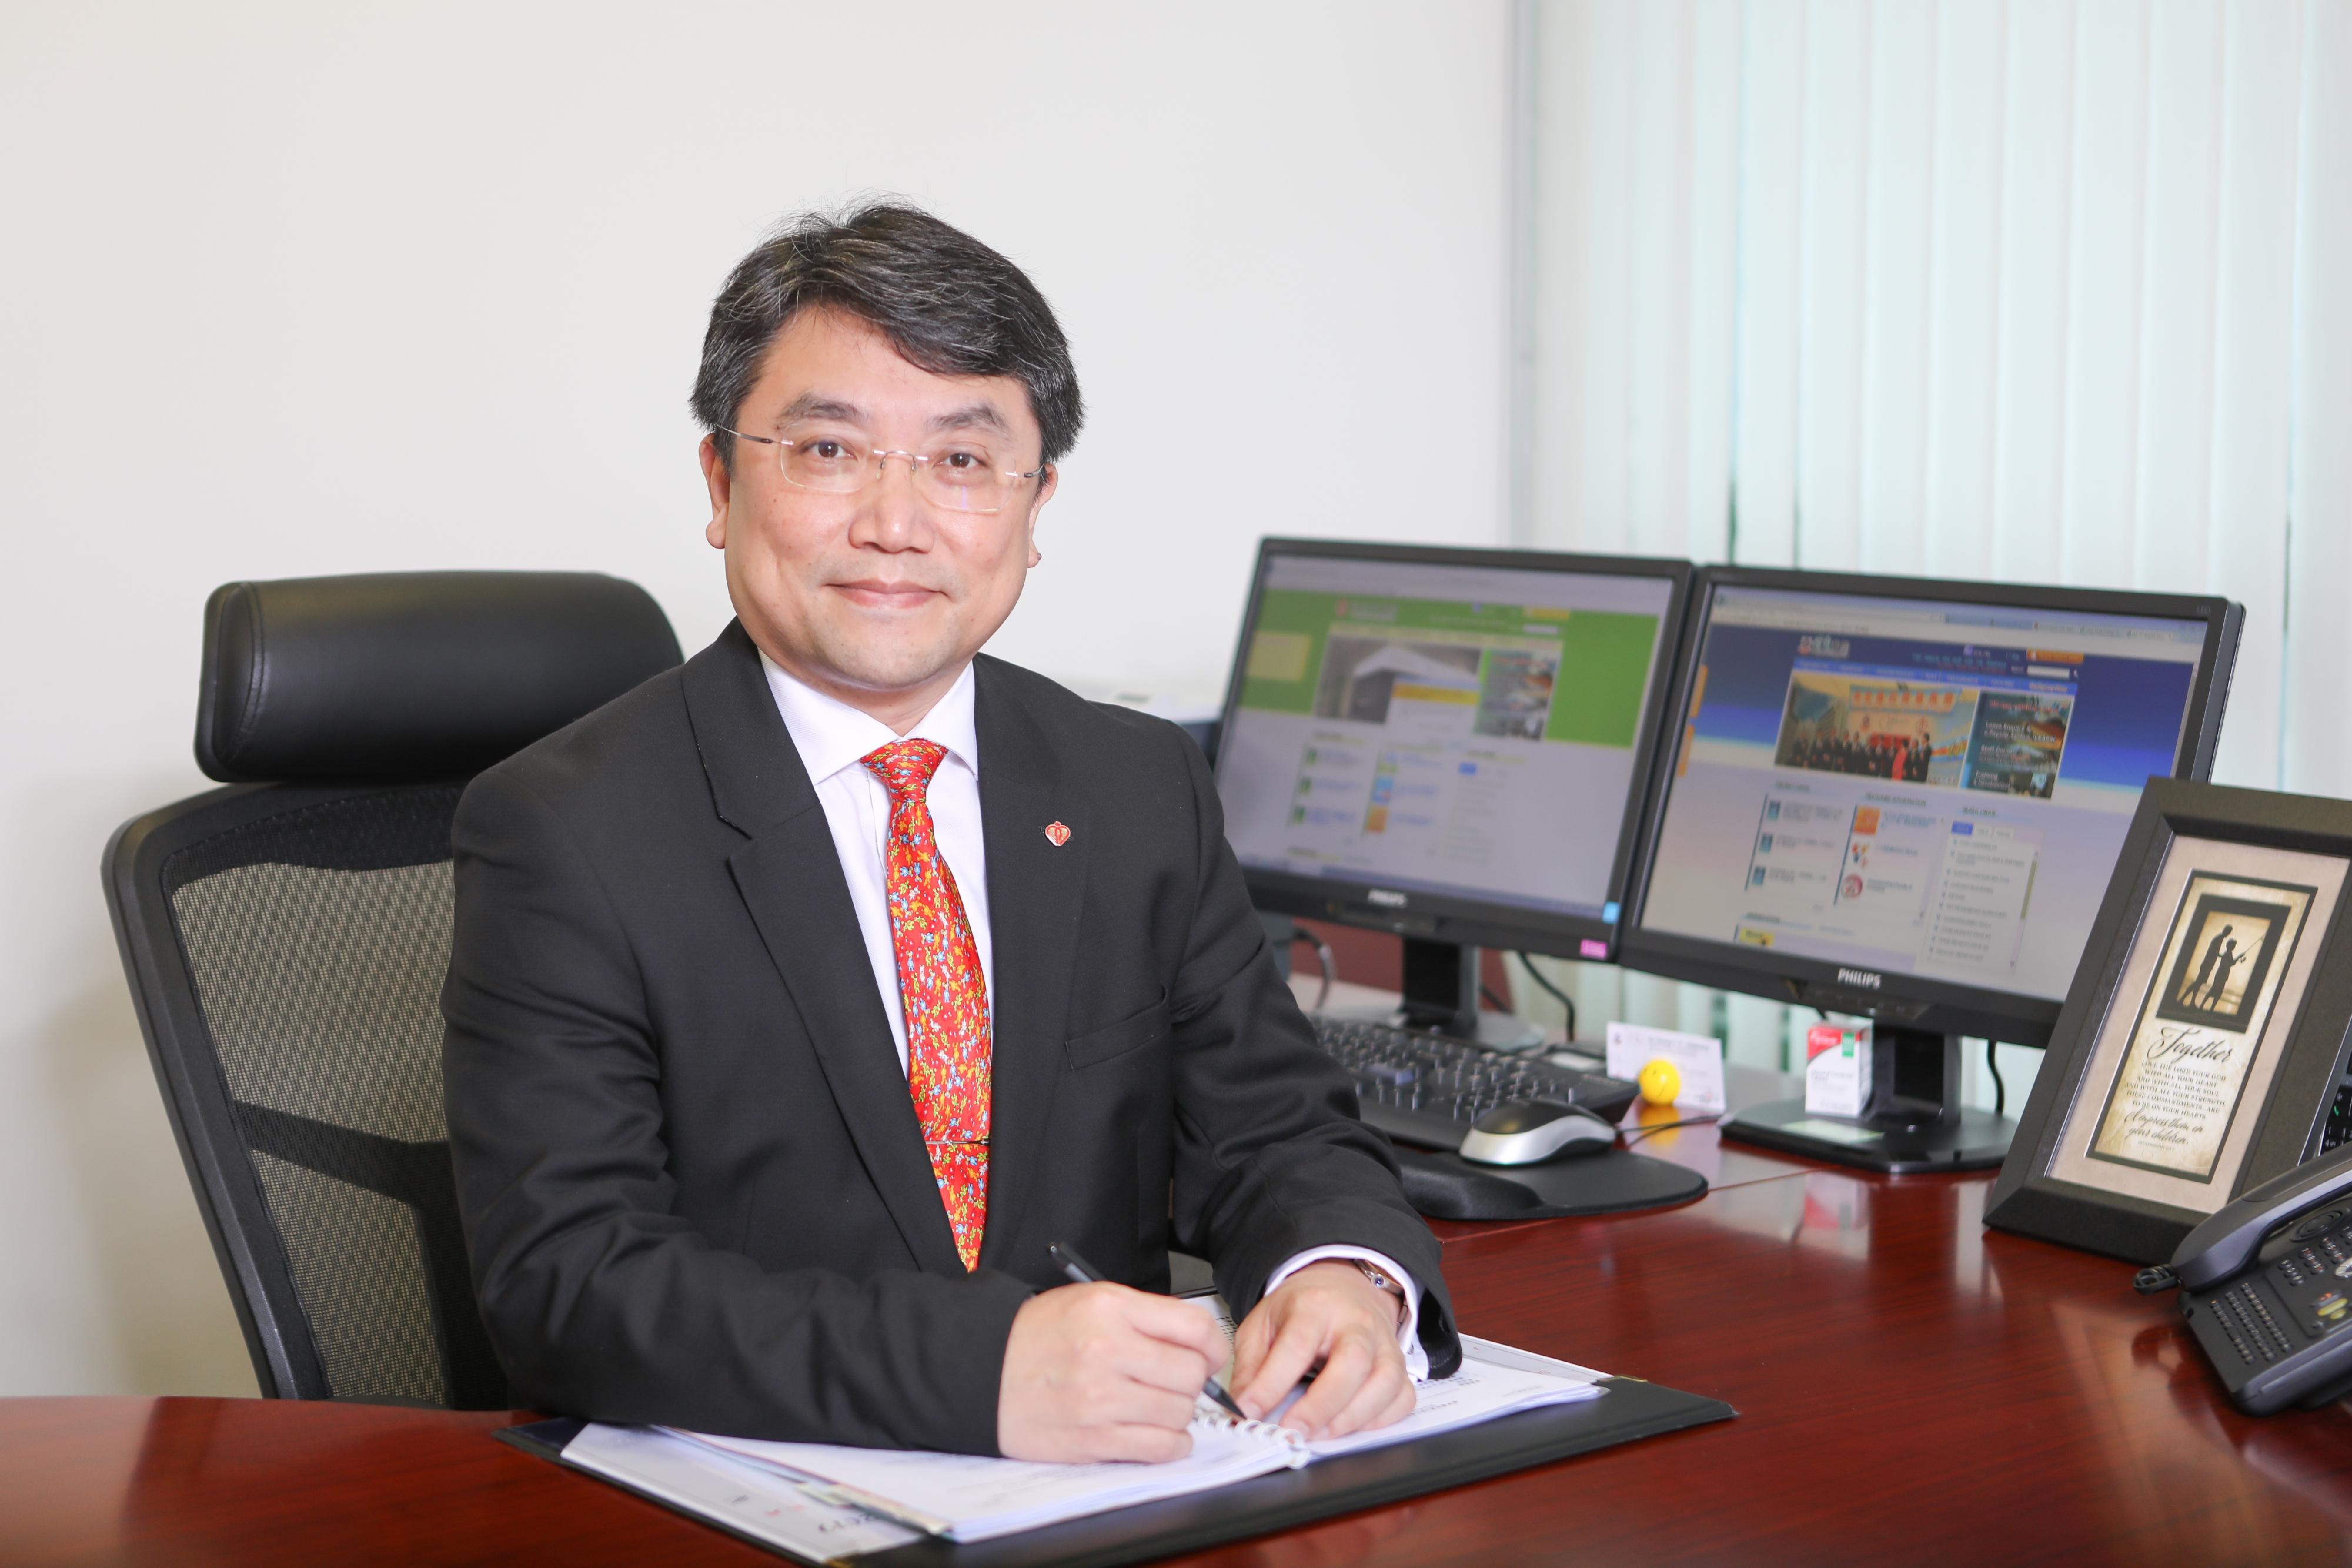 The Hospital Authority announced today (January 20) that Dr Deacons Yeung will be rotated to serve as Cluster Chief Executive of Kowloon East and Hospital Chief Executive of United Christian Hospital with effect from June 1, 2022.

